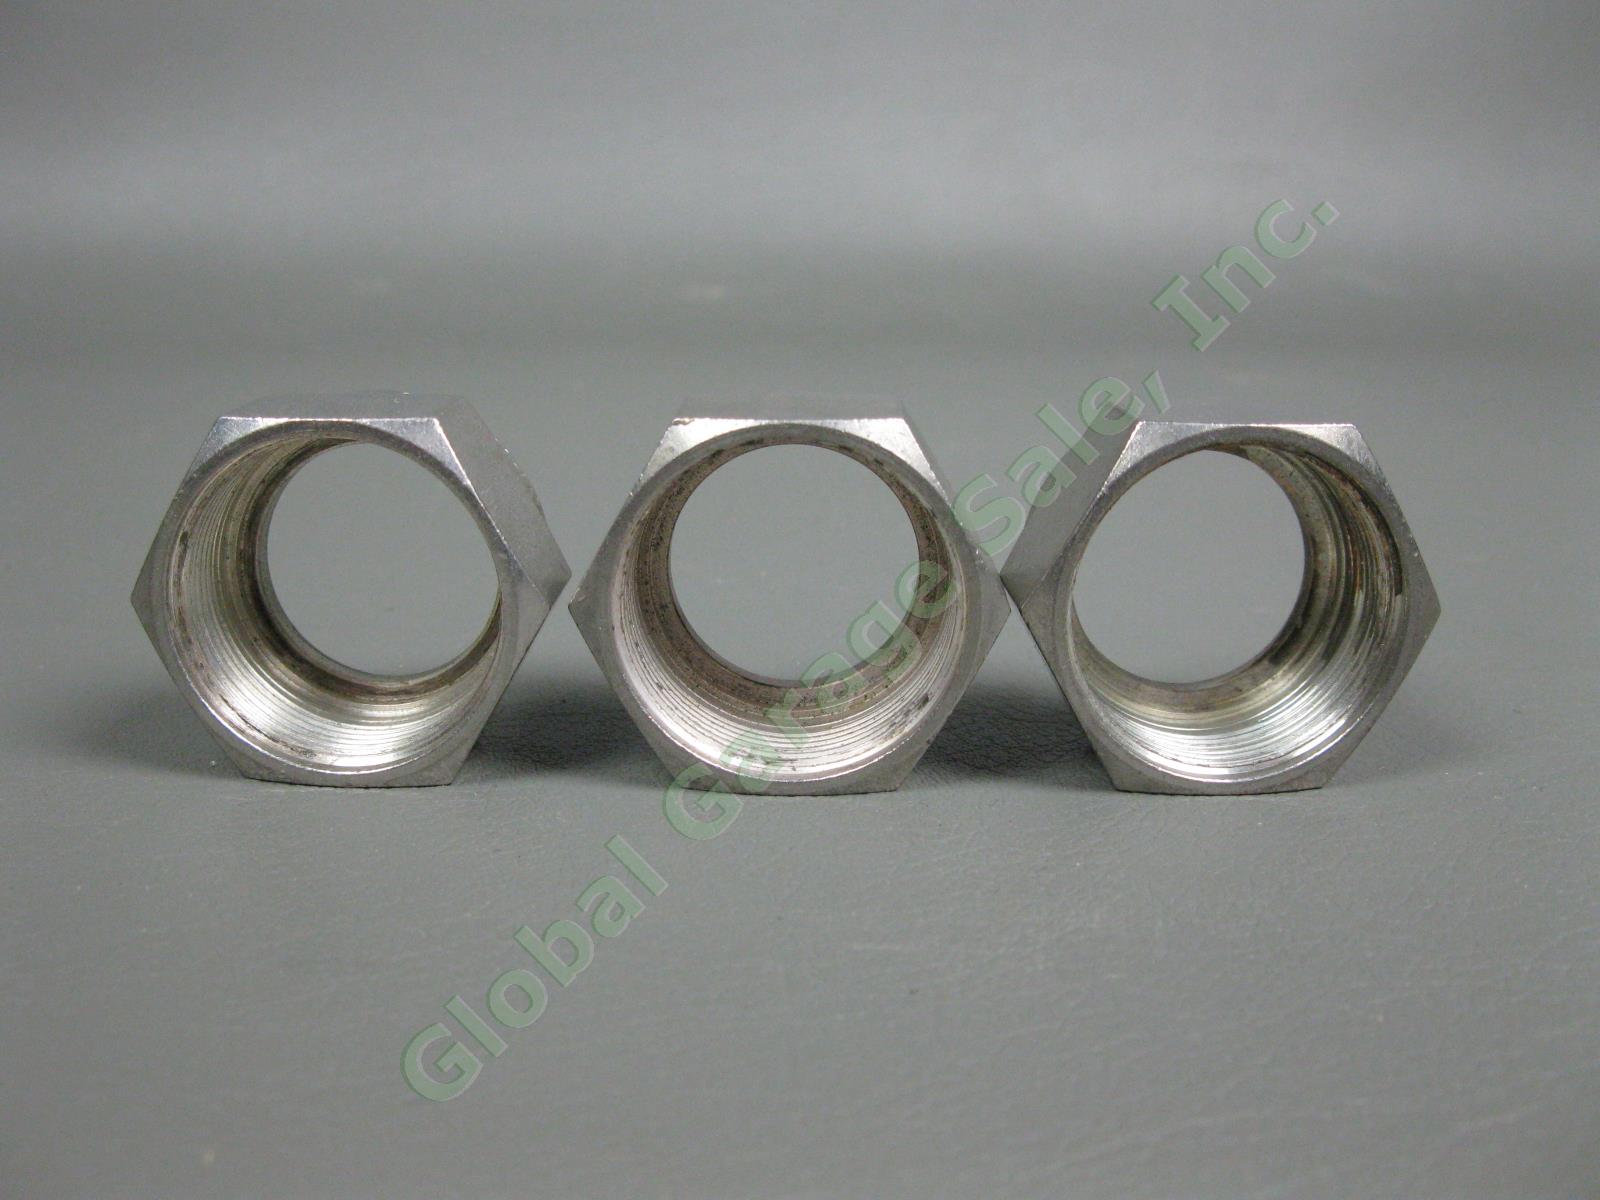 6 Swagelok 7/8" OD SS 314 Compression Tube Fitting Union Tee Nut Less Ferrules 4